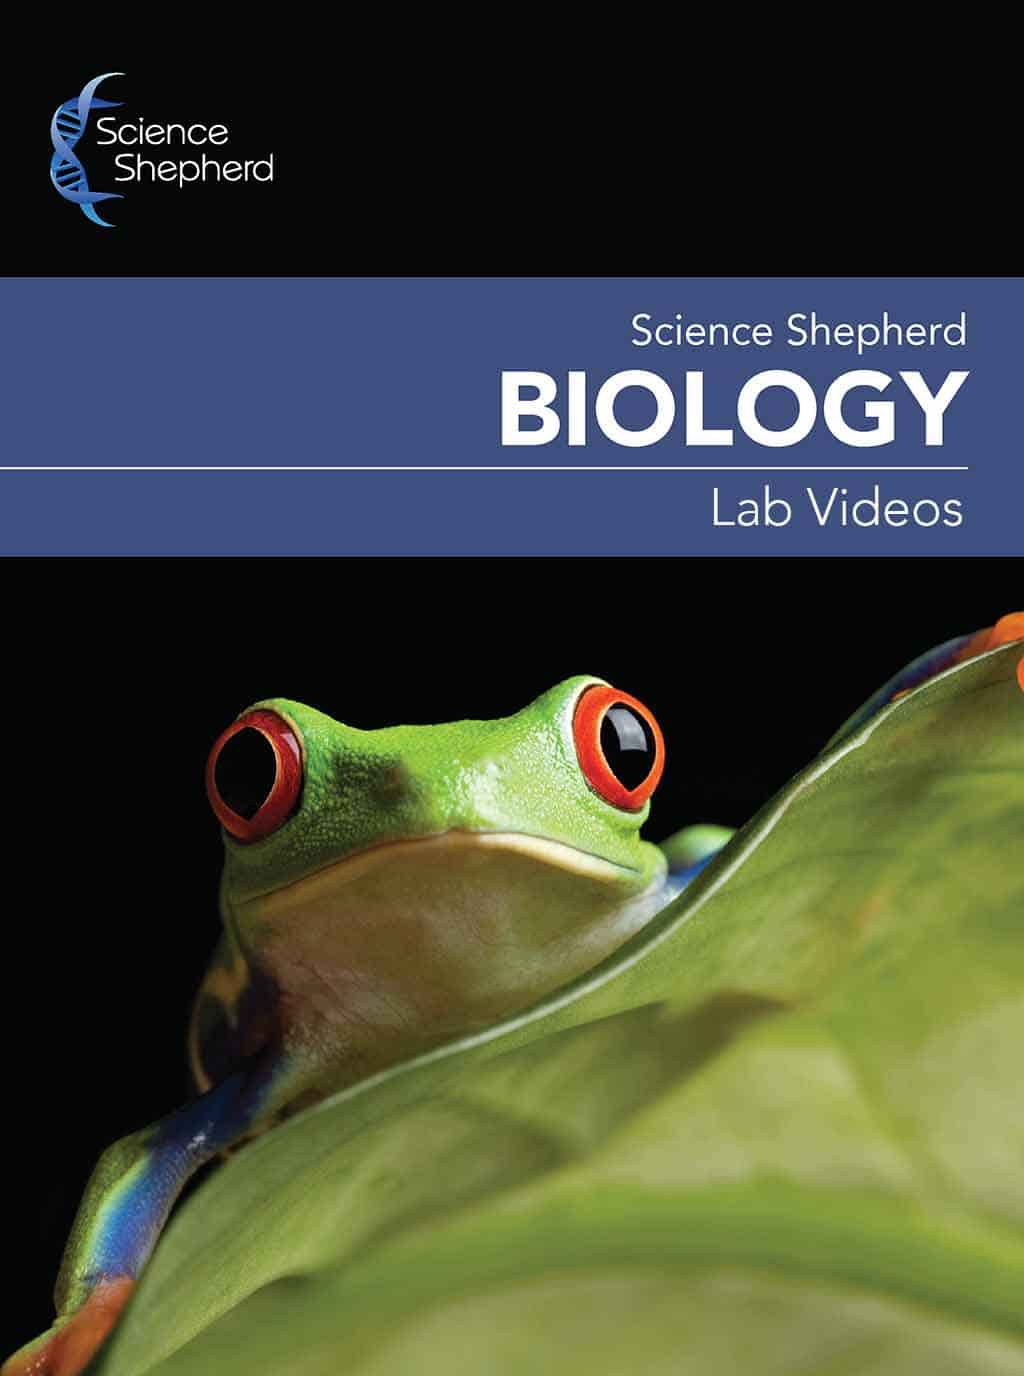 Science Shepherd Homeschool Biology Lab Videos cover of a frog on a green leaf